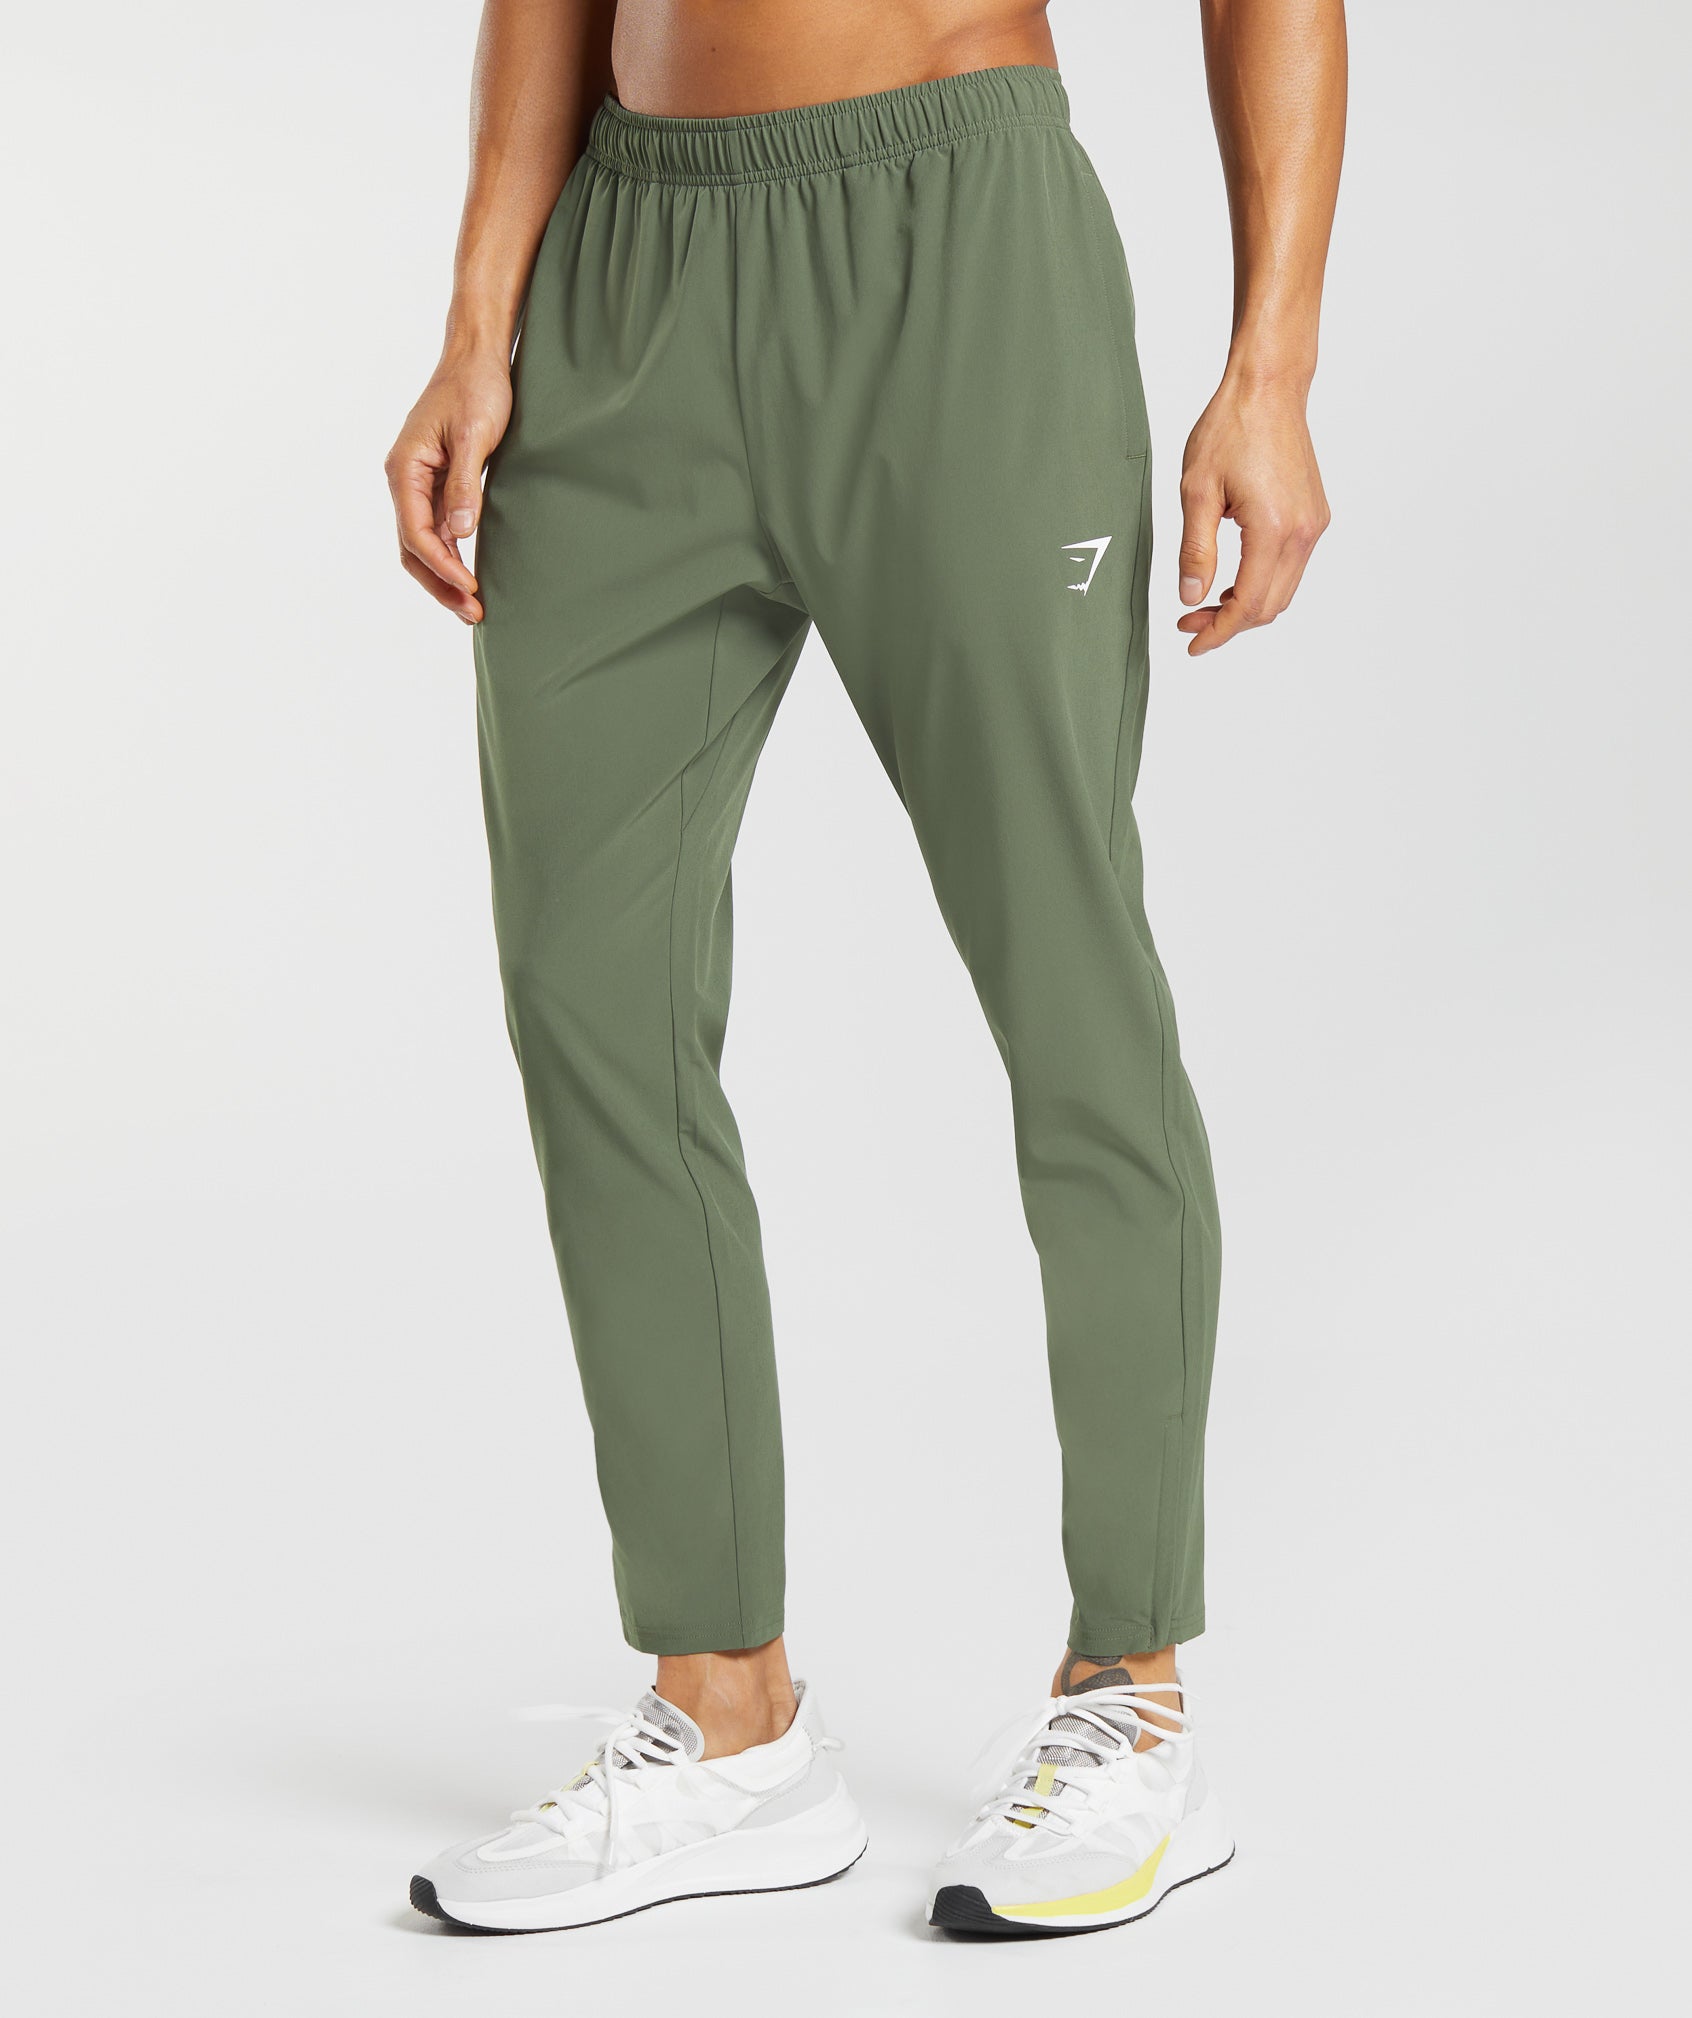 Gymshark Arrival Woven Joggers Ankle Zip Track Pants Workout